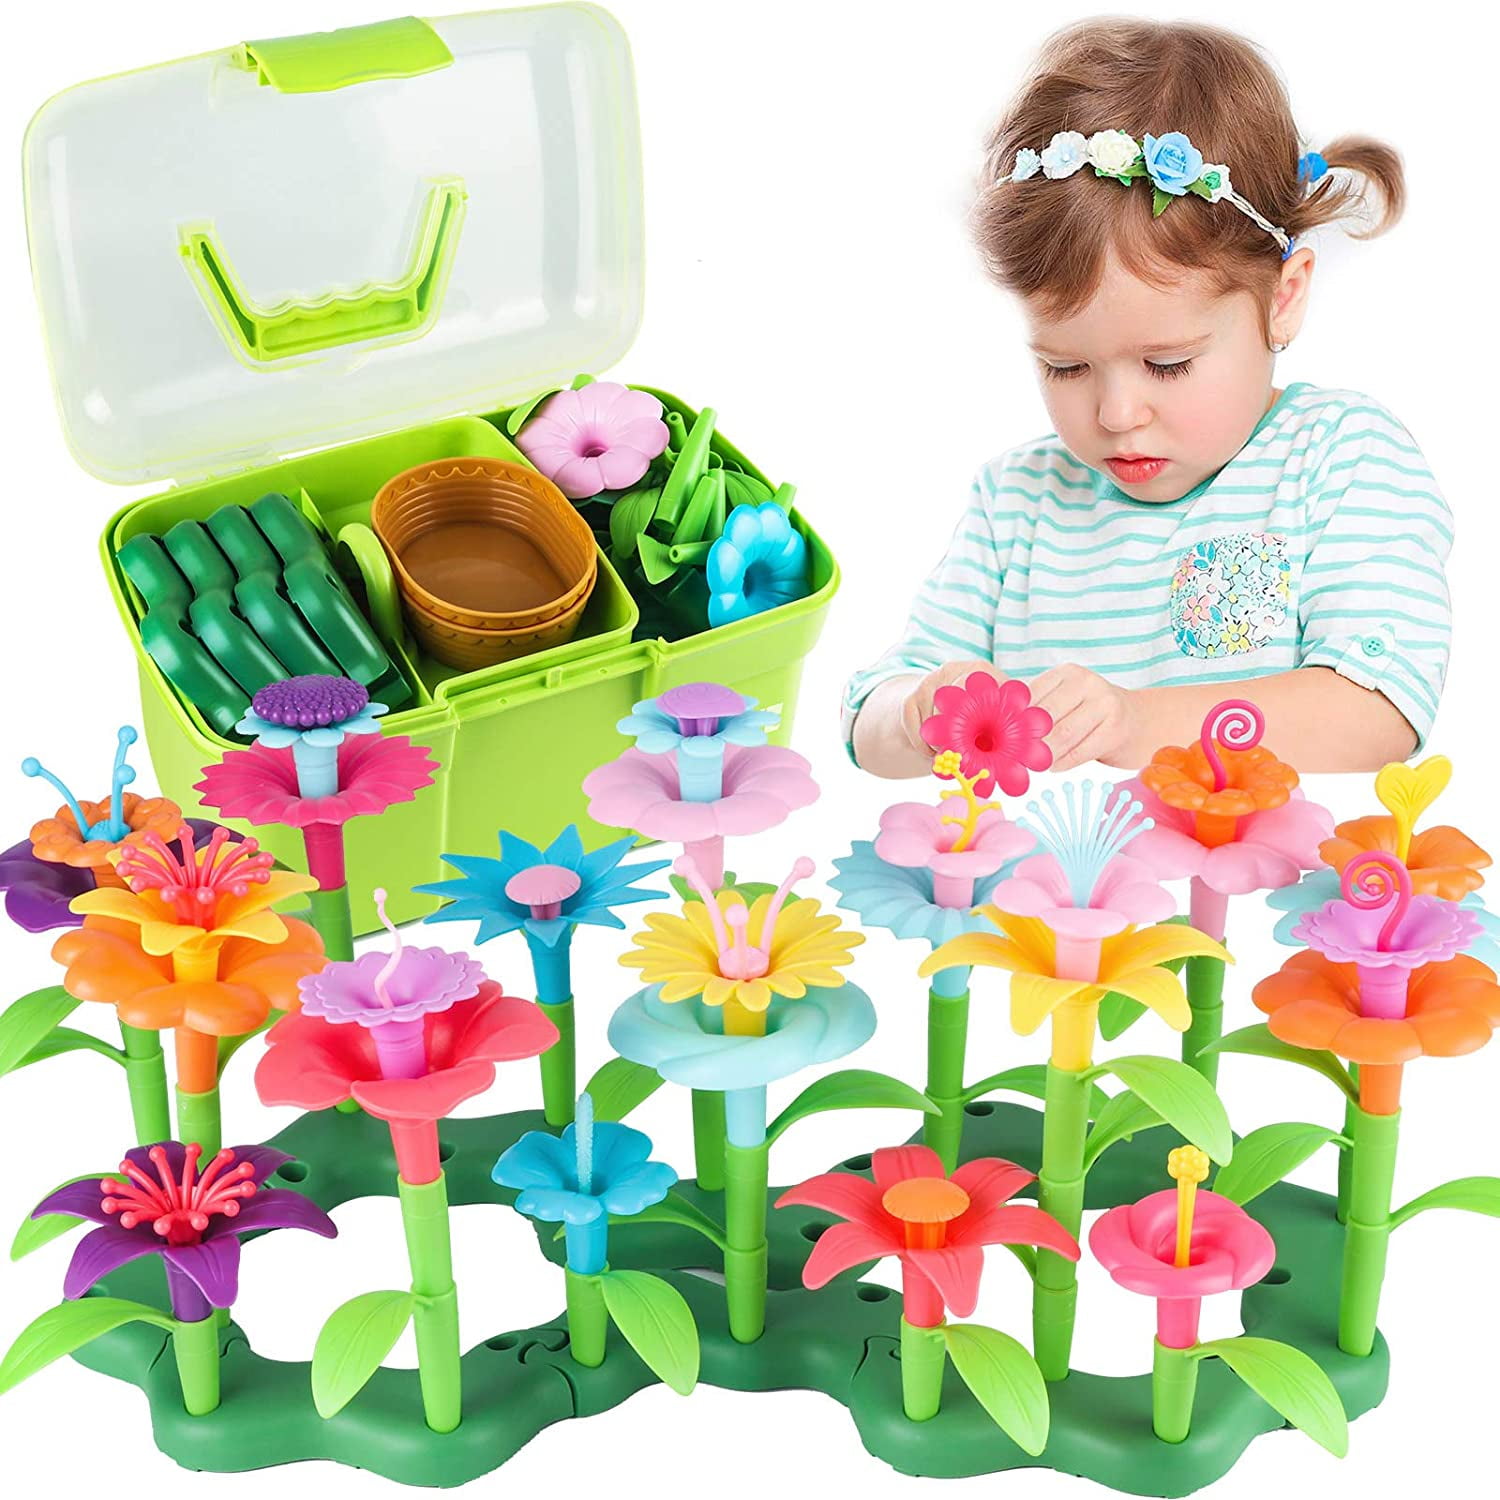 Stacking Game for Toddlers Playset Gardening Pretend Gift for Girls Kids STEM Toy siicaaG Flower Garden Building Toys Educational Activity for Preschool Children Age 3 4 5 6 Year Old 